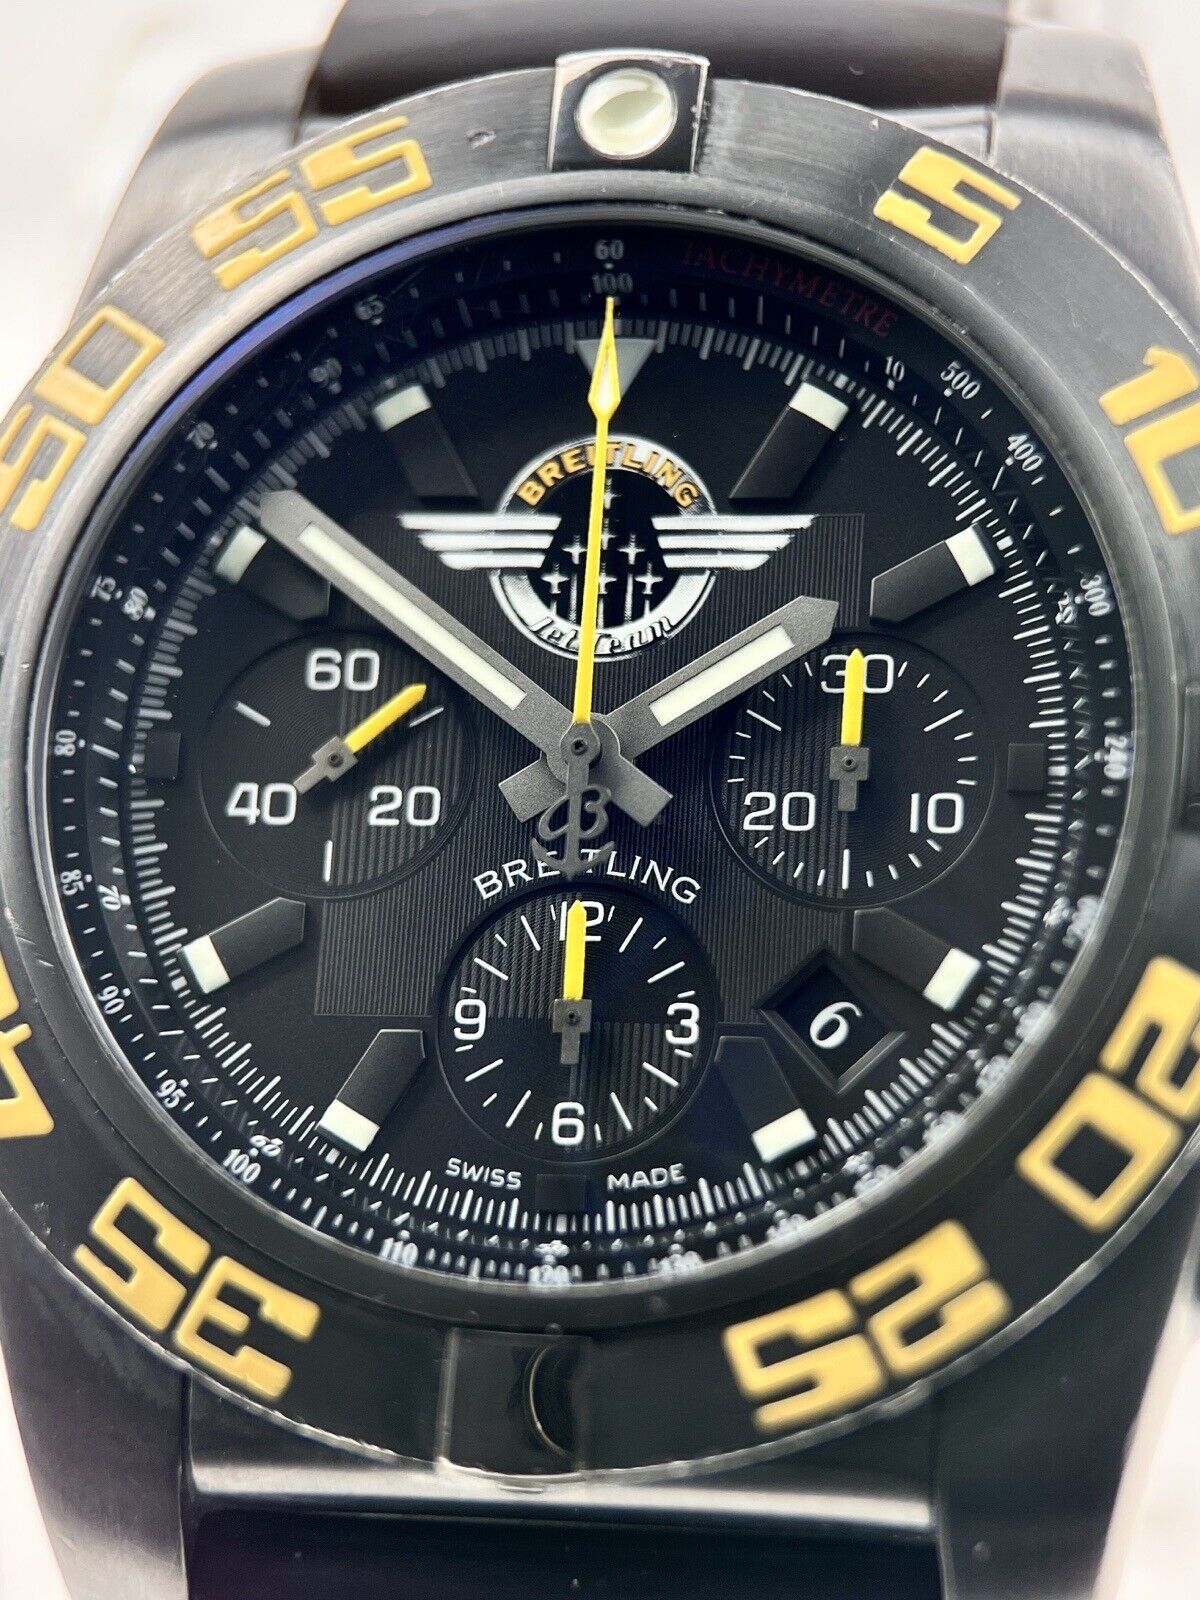 Breitling Chronomat PVD MB0110 Jet Team Limited Edition Automatic 44mm B&P